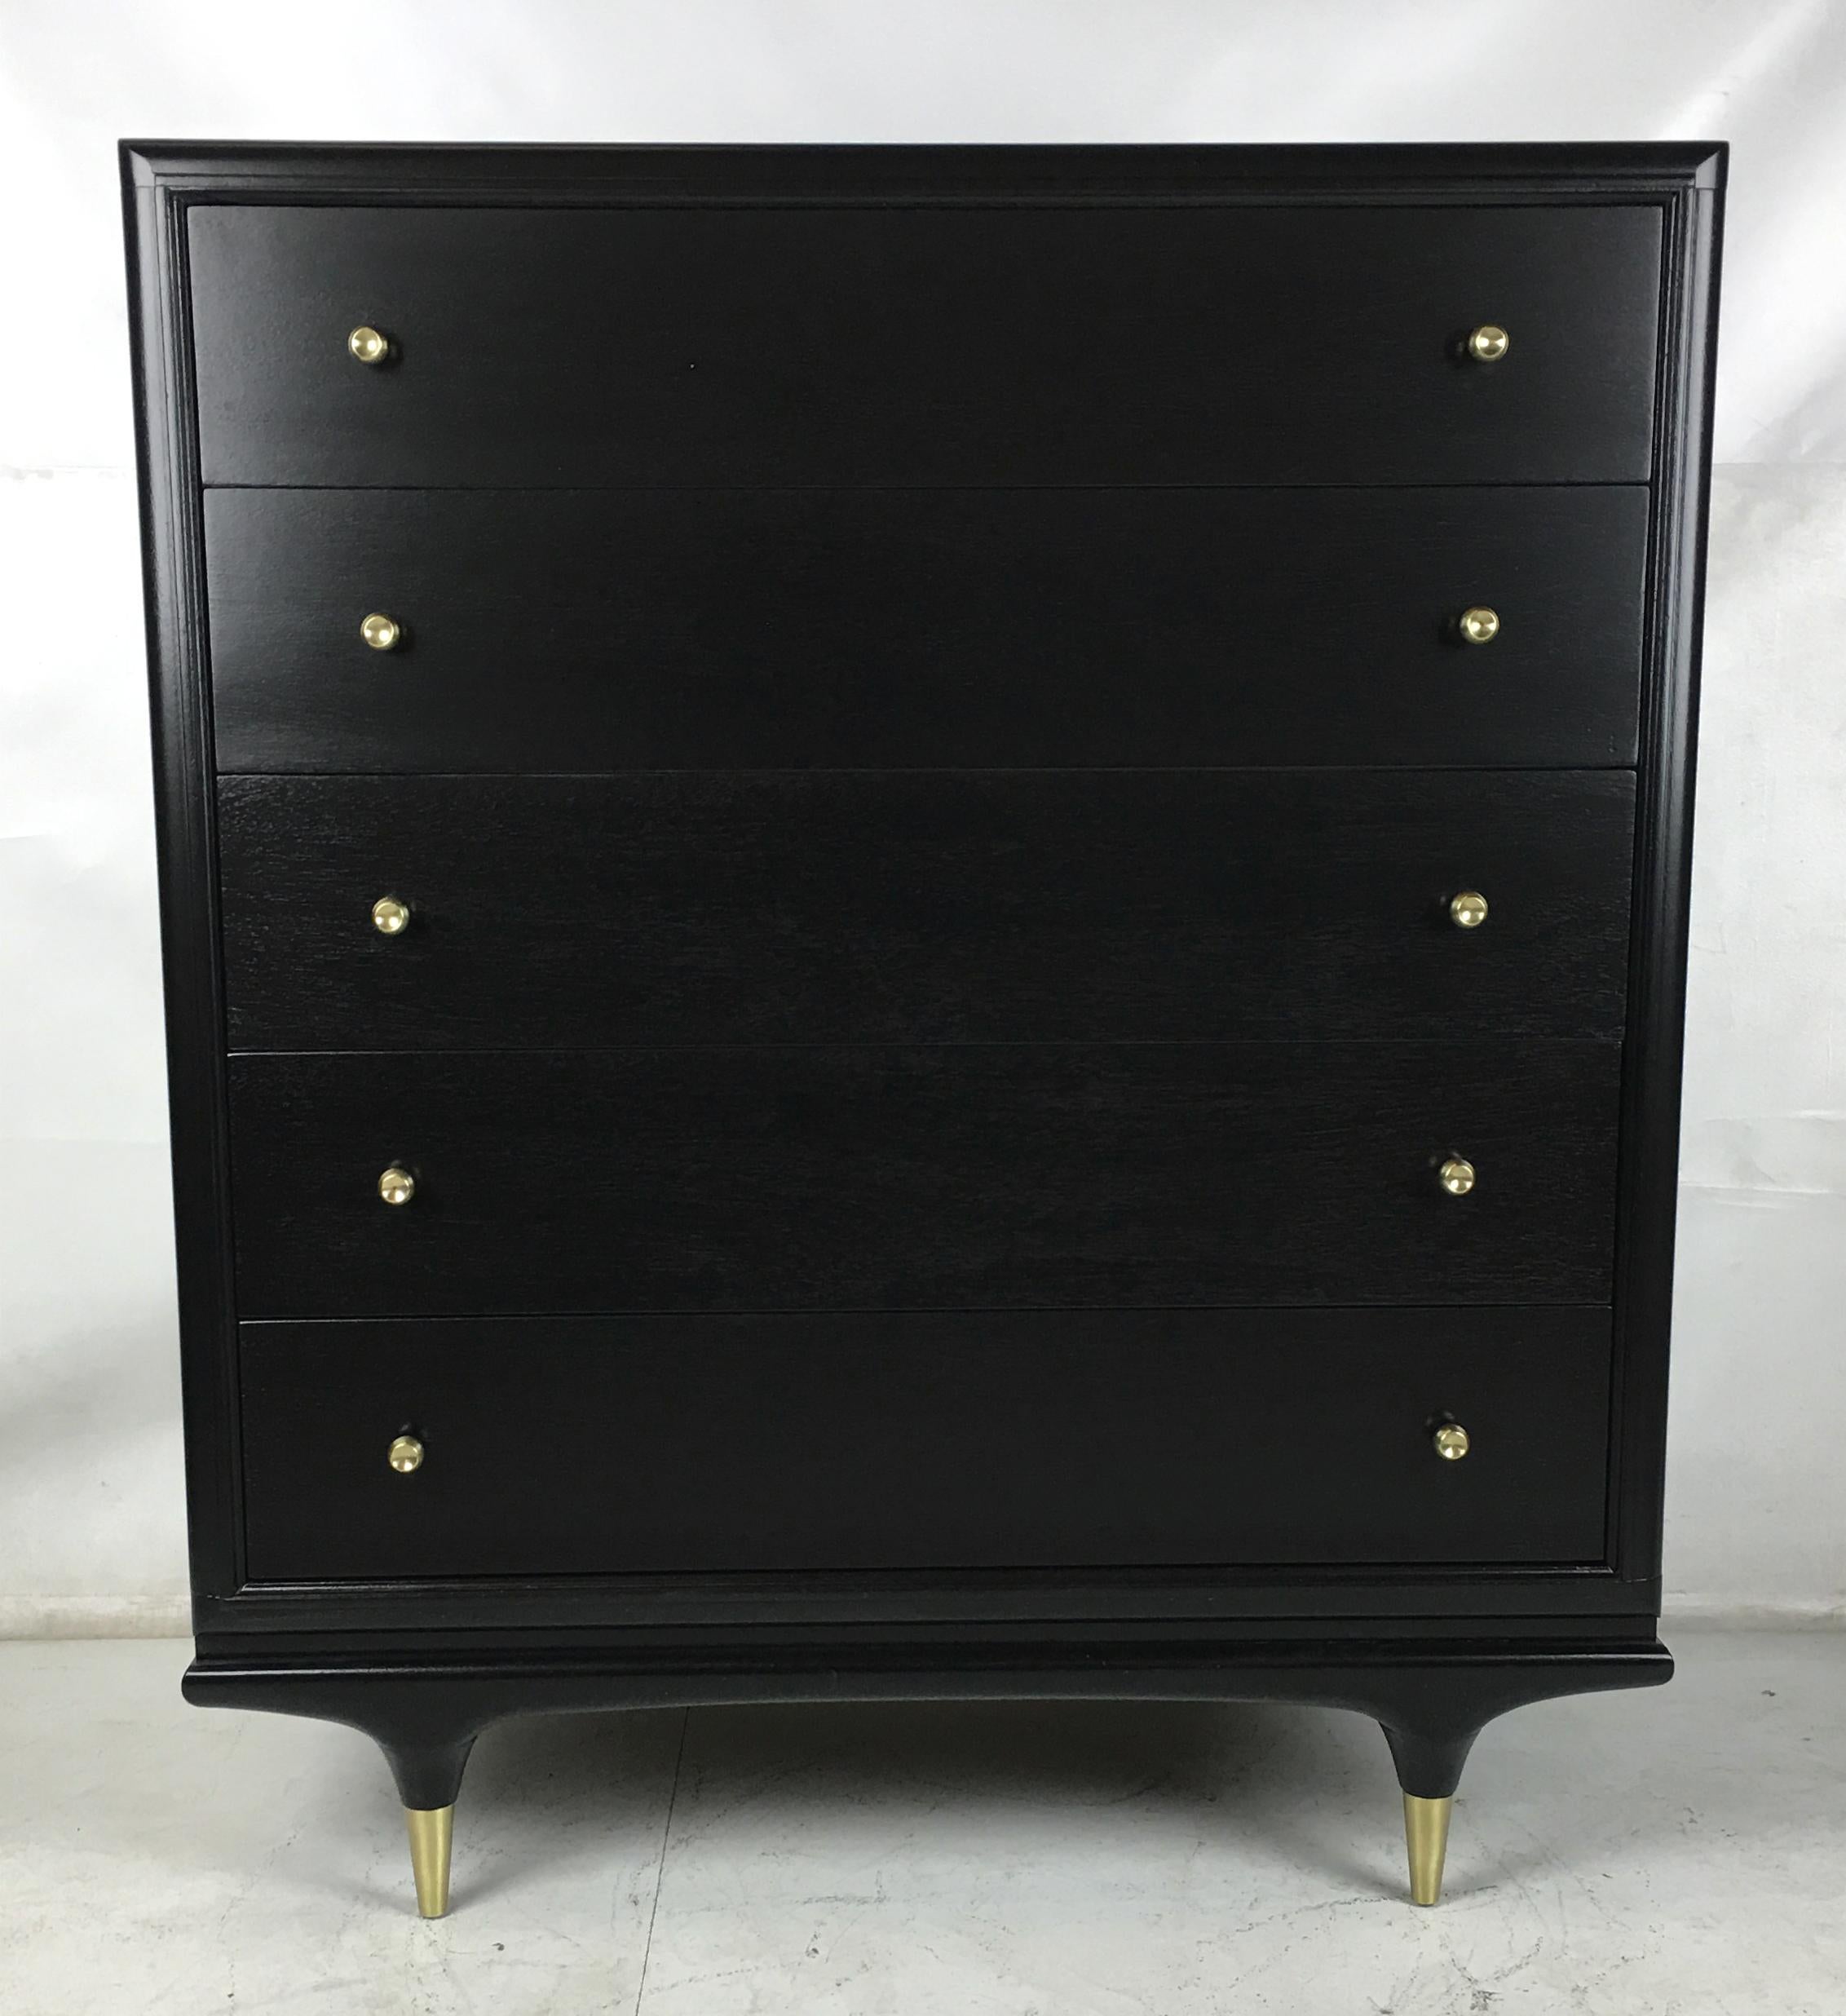 Ebonized Walnut highboy dresser with stiletto legs and solid brass drawer hardware. The legs have long tapered brass sabots. The dresser has been meticulously refinished in open grain black lacquer and the brass mounts have been freshly polished and